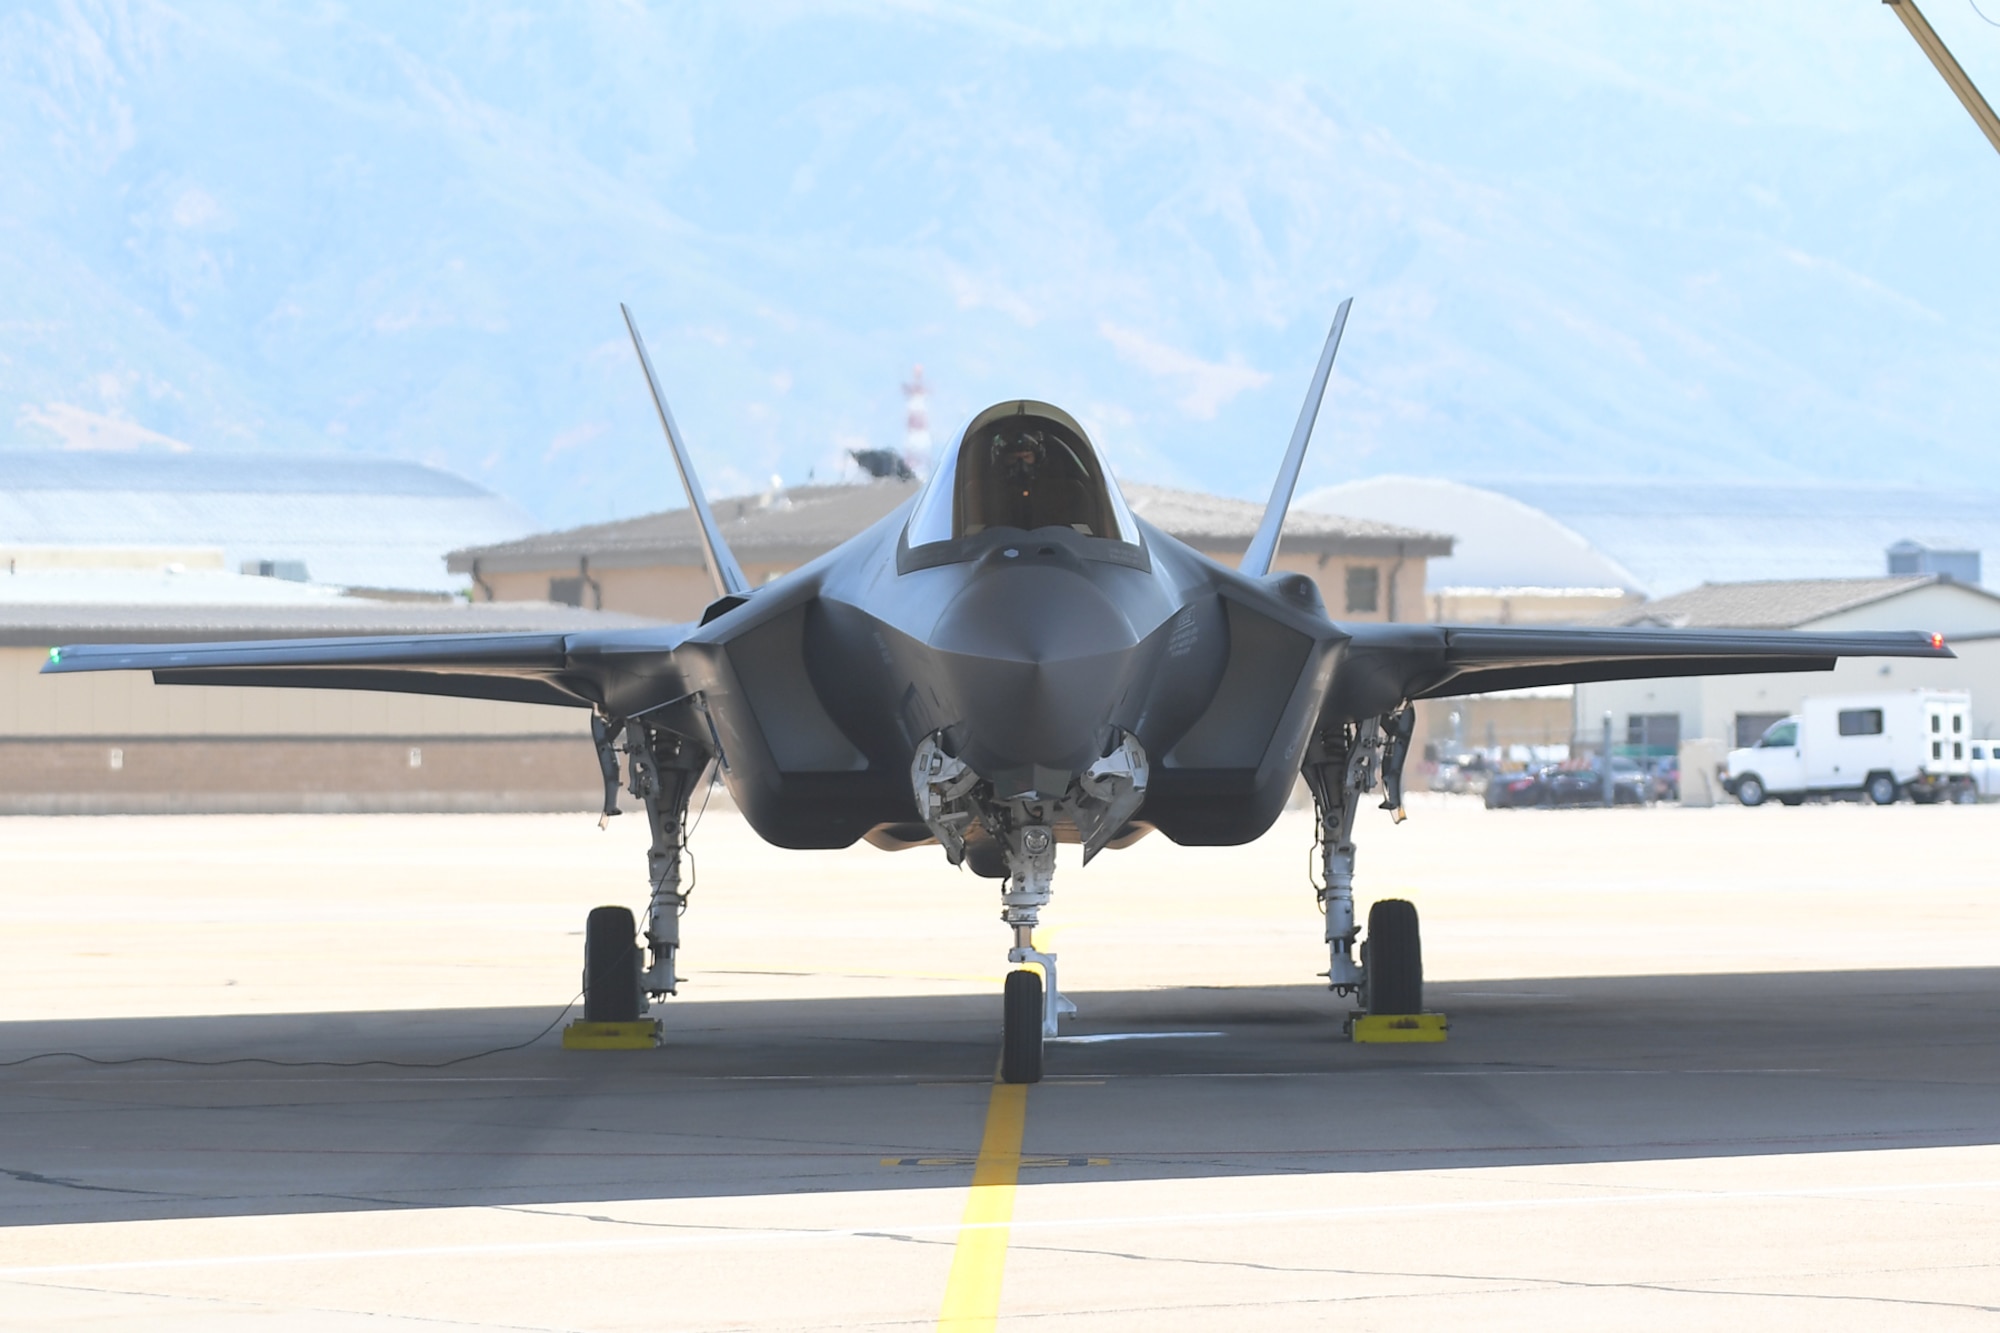 An F-35A Lightning II from the 4th Fighter Squadron prepares to depart on a training sortie Aug. 8, 2018, at Hill Air Force Base, Utah. Airmen and F-35s from the active-duty 388th Fighter Wing and Reserve 419th Fighter Wing at Hill AFB participated in the Air Force’s Weapon System Evaluation Program known as Combat Hammer. (U.S. Air Force photo by Todd Cromar)